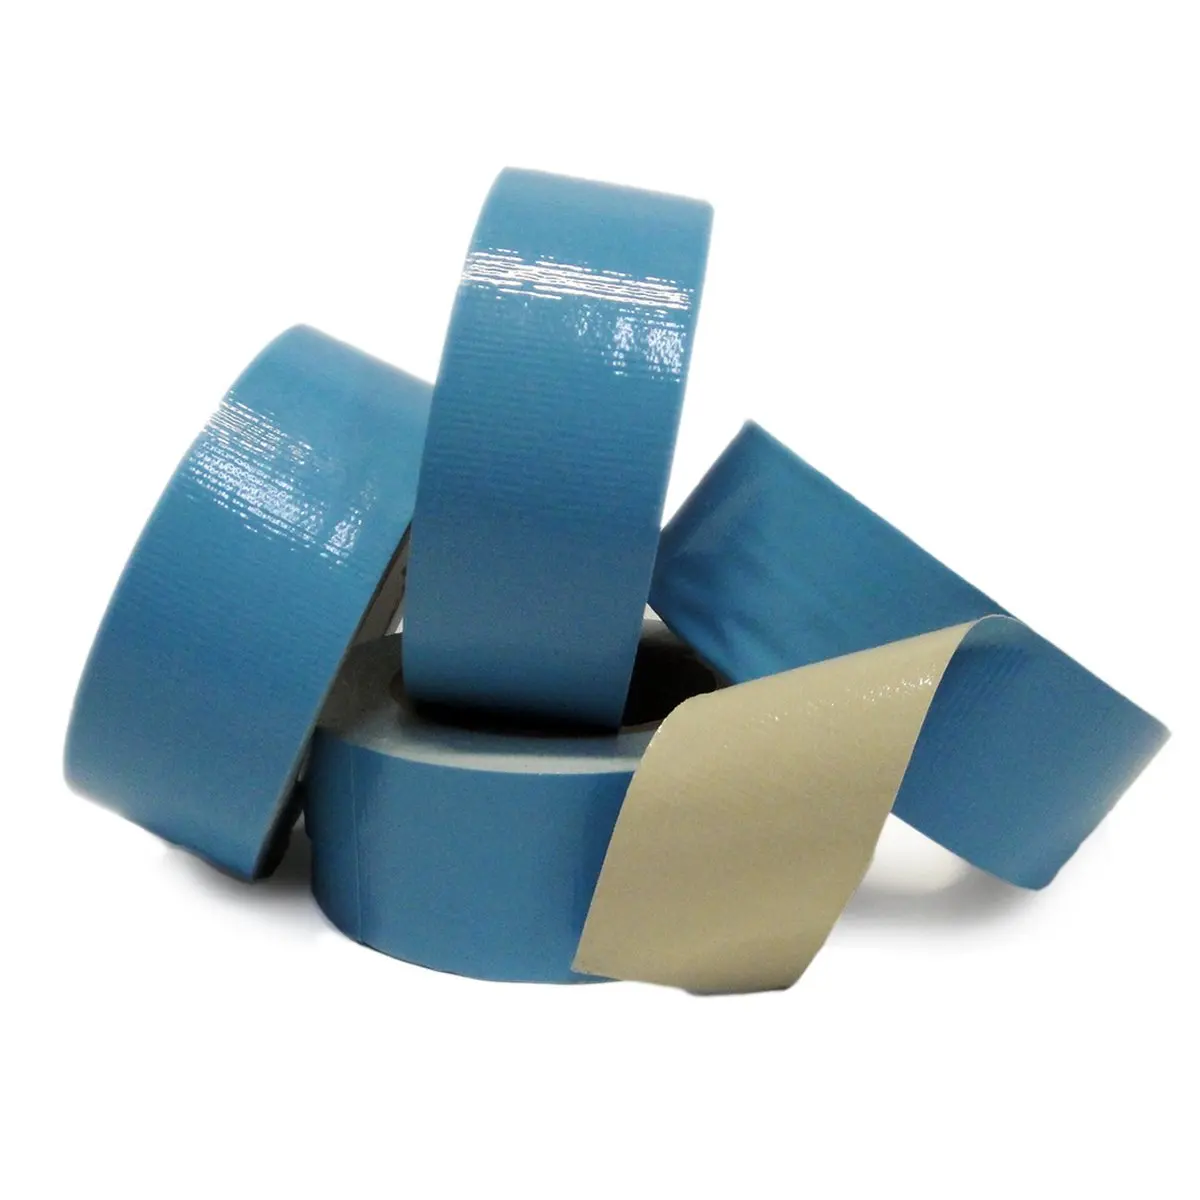 Cheap Carpet Tape Lowes, find Carpet Tape Lowes deals on line at Alibaba.com